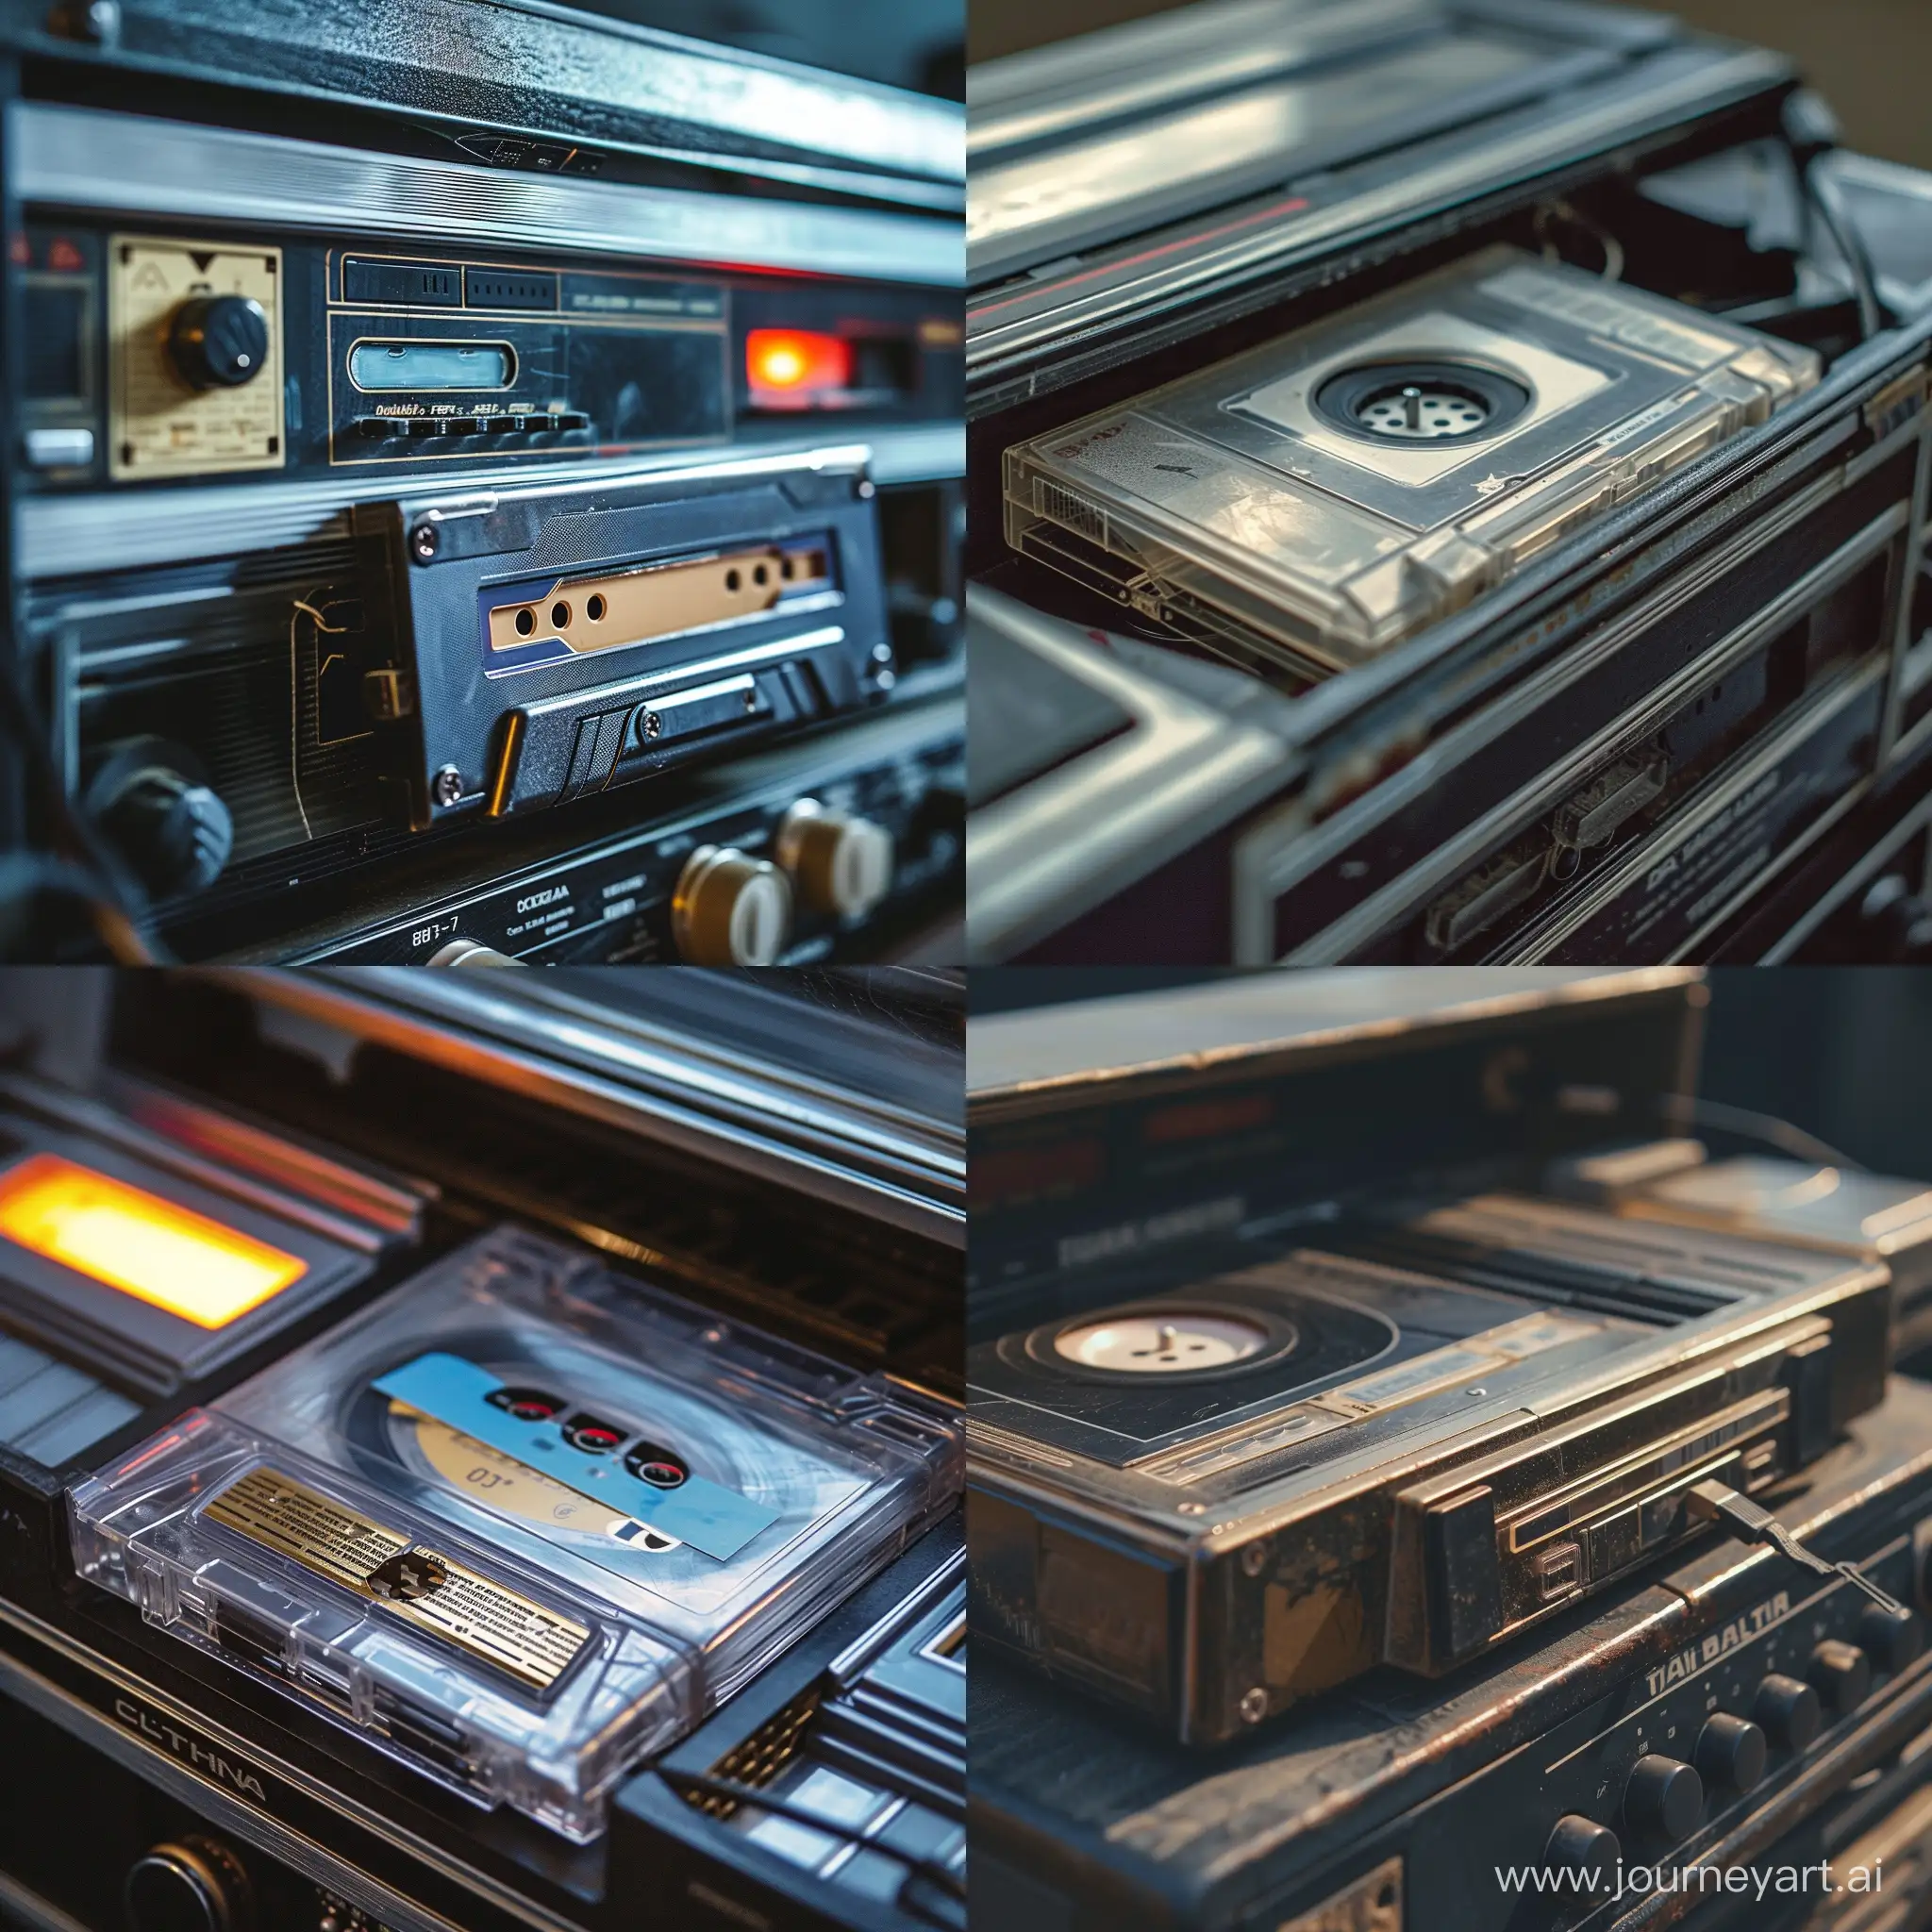 Vintage-Boombox-with-80s-Style-Audio-Cassette-Closeup-Image